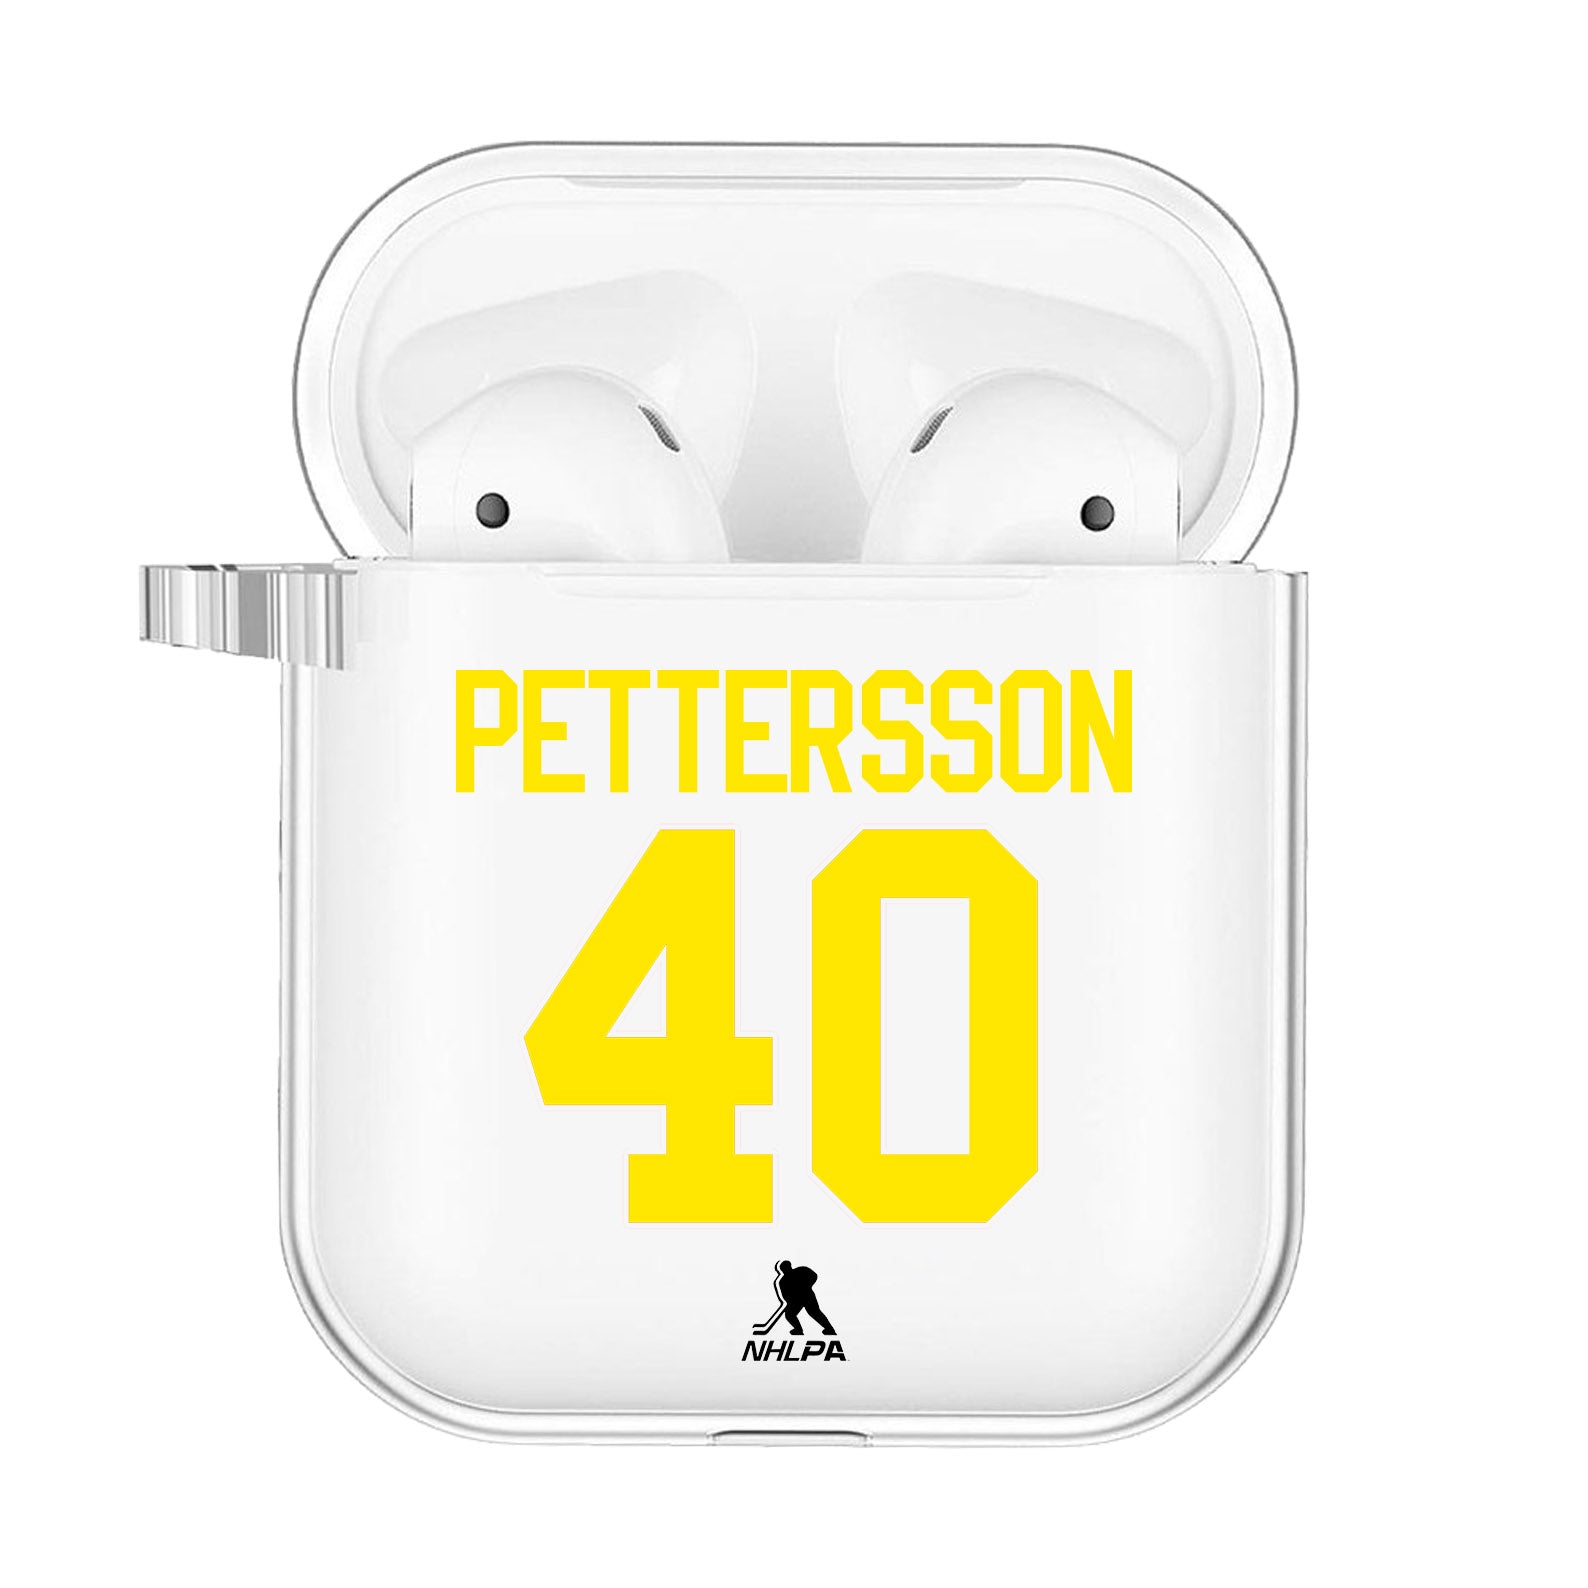 Vancouver AirPod Cases